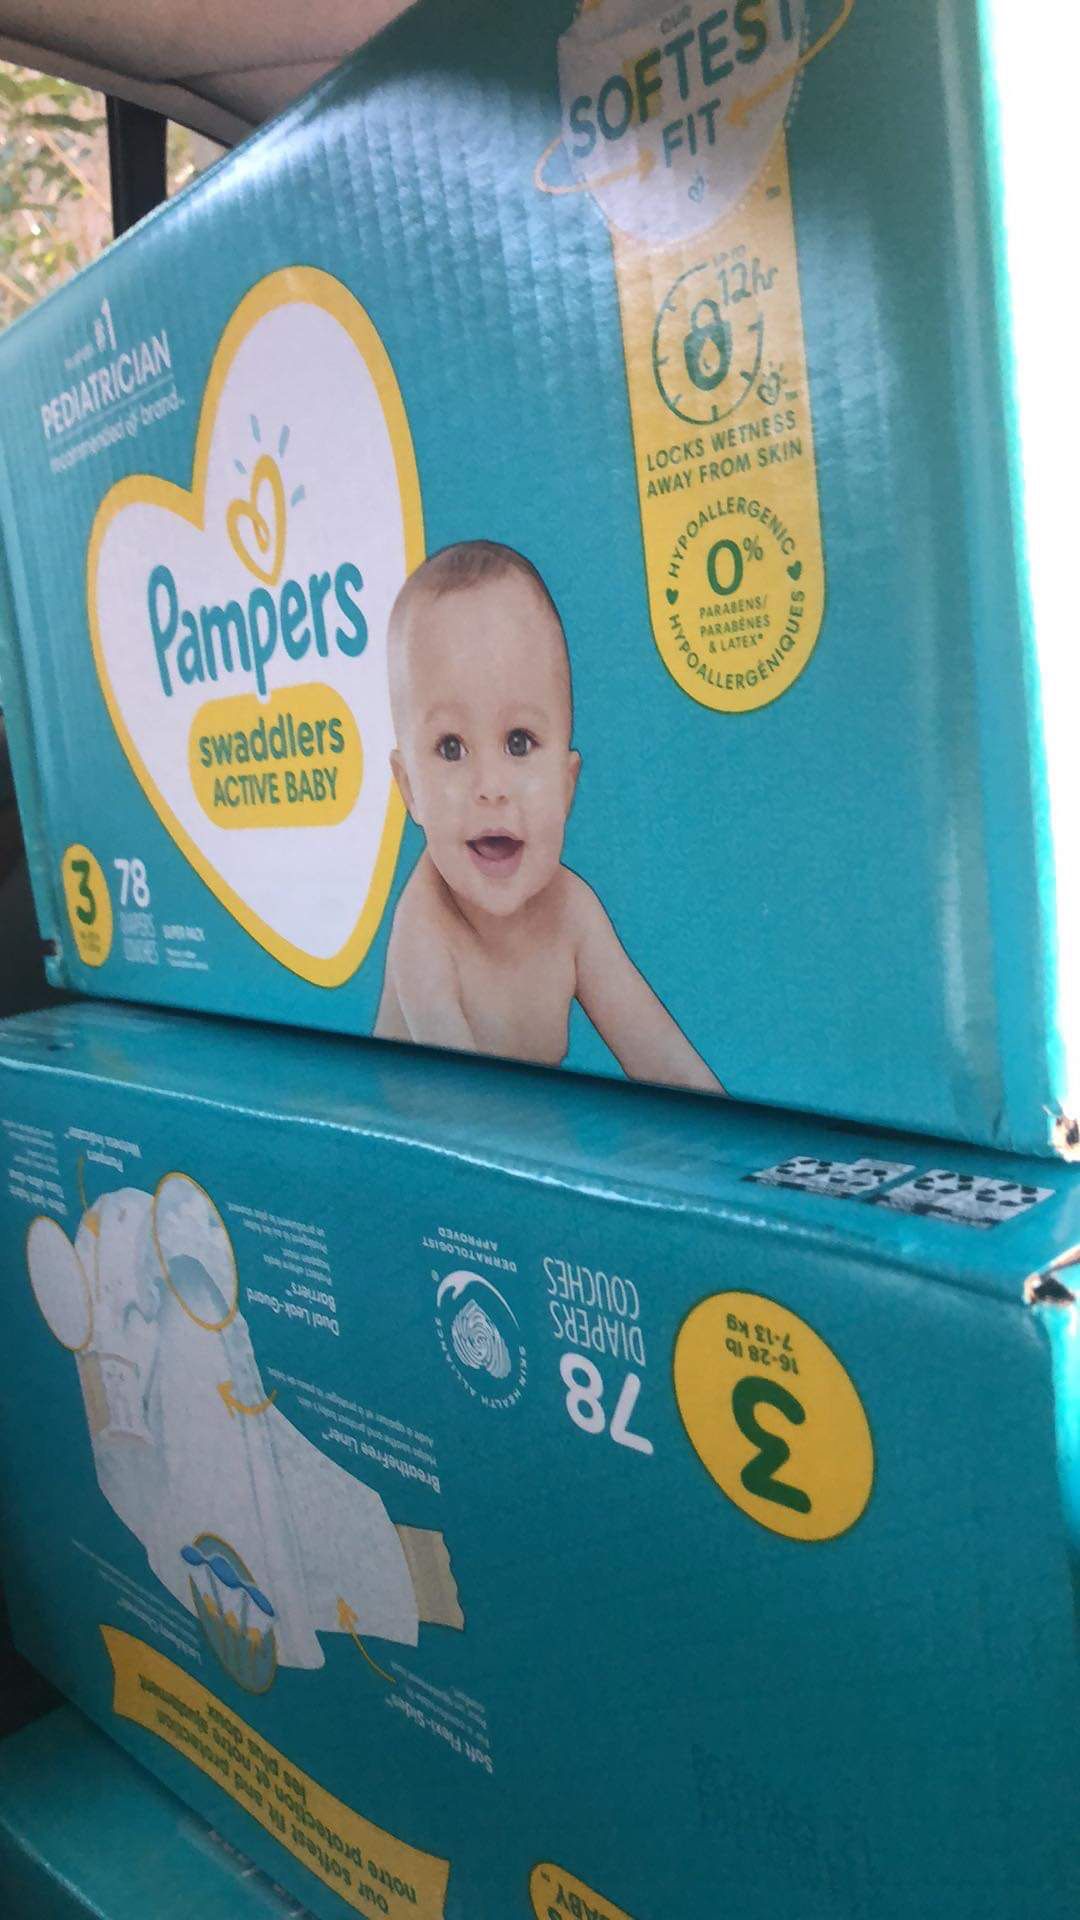 Pampers Swaddle 